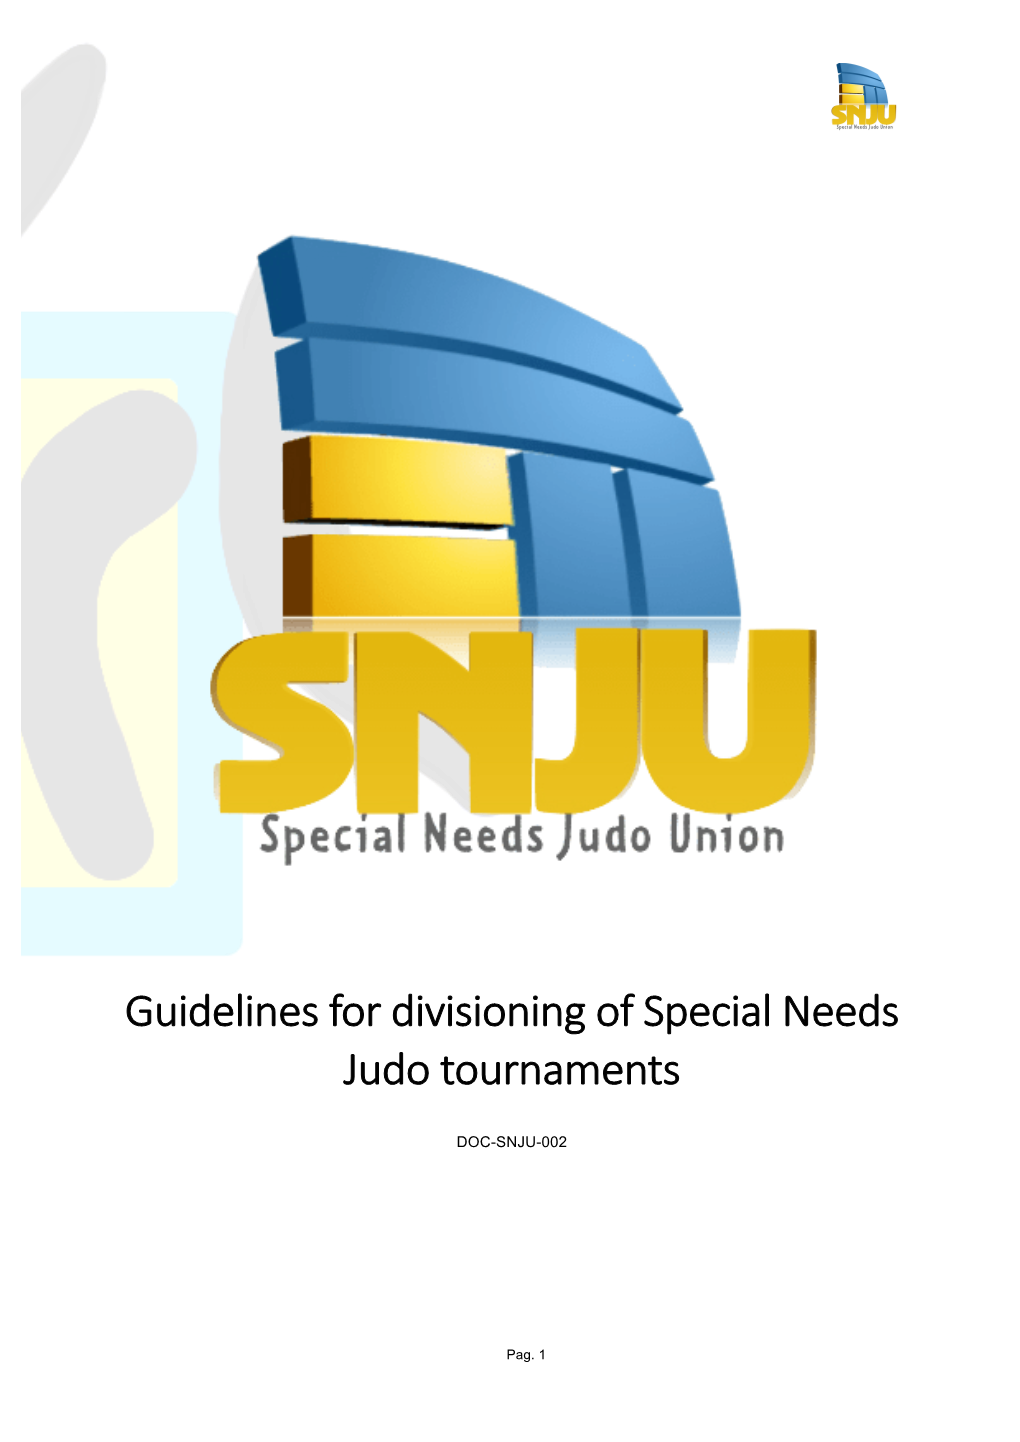 Guidelines for Divisioning of Special Needs Judo Tournaments